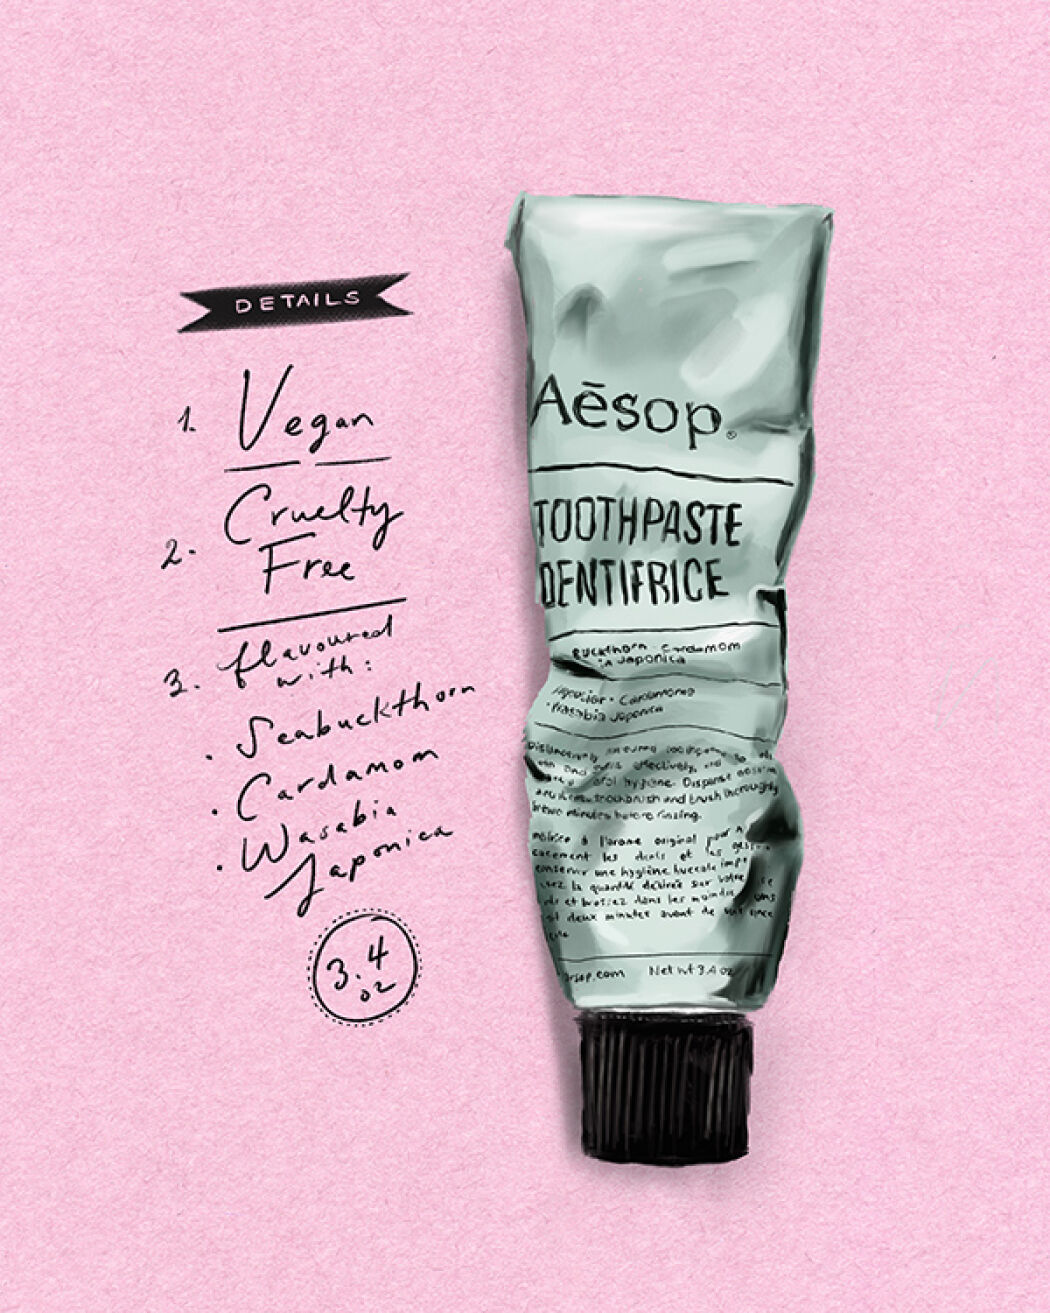 Packaging illustration for the beauty brand Aesop by Christina Gliha